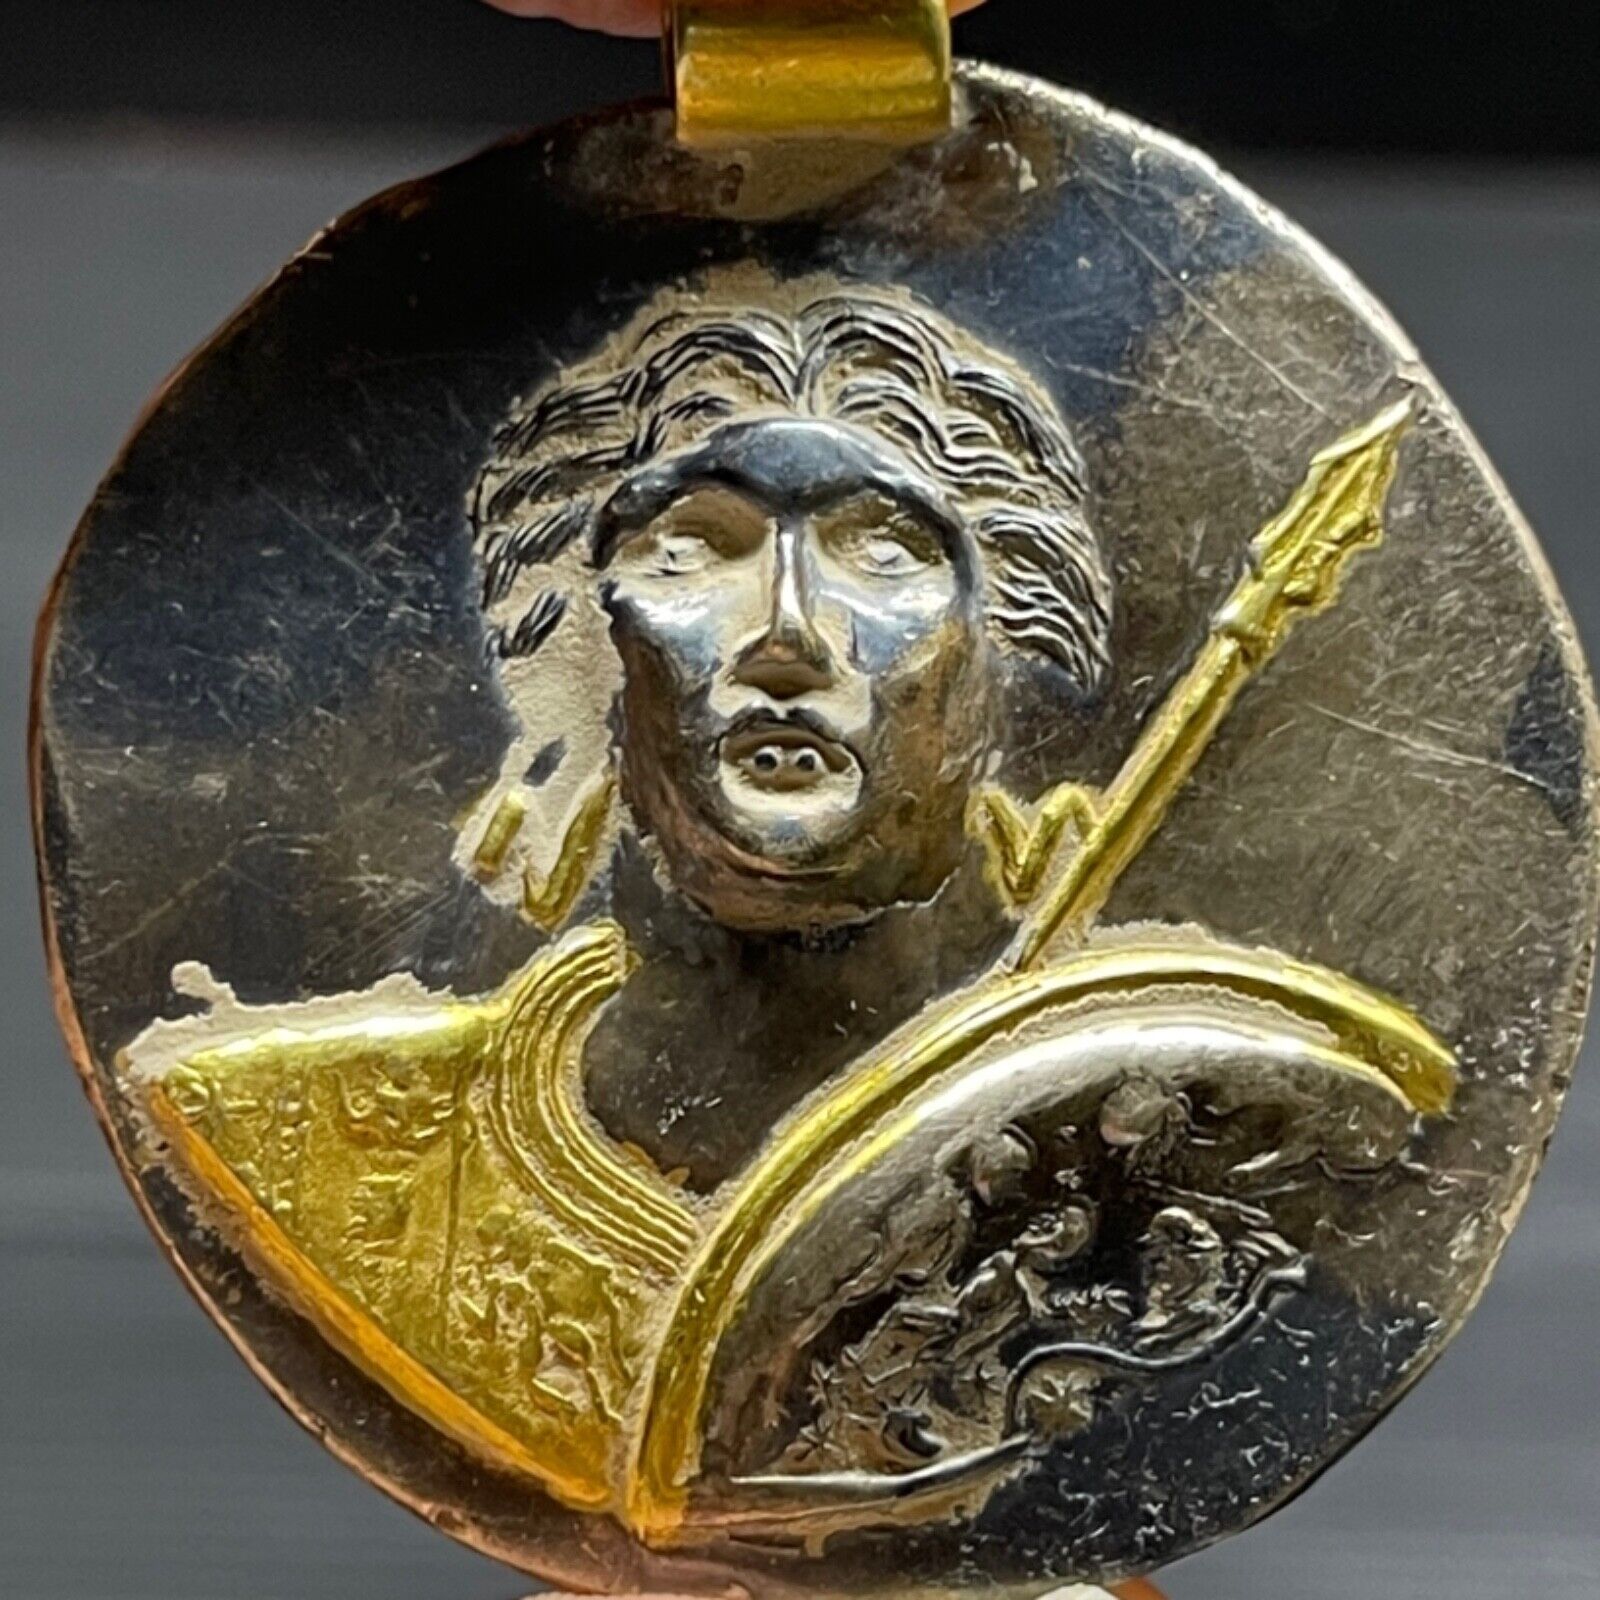 Ancient Greek gold and silver pendant depicting young Alexander